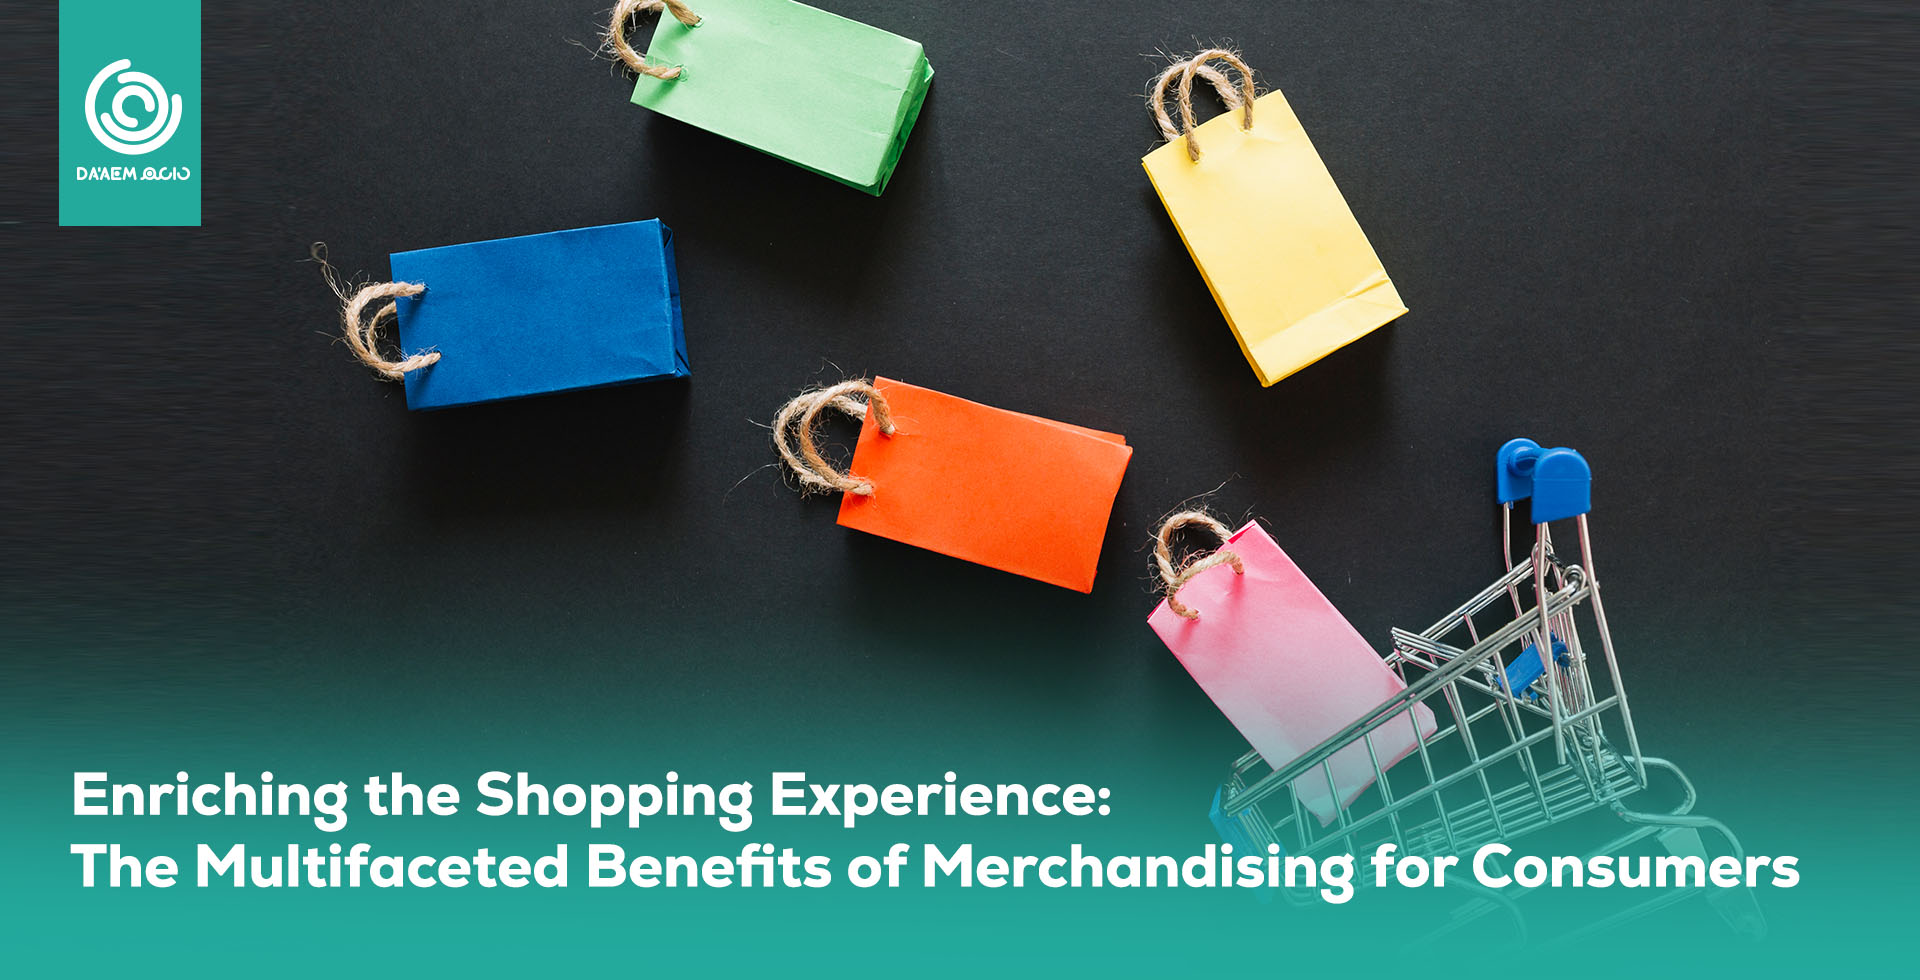 Enriching the Shopping Experience: The Multifaceted Great Benefits of Merchandising for Consumers